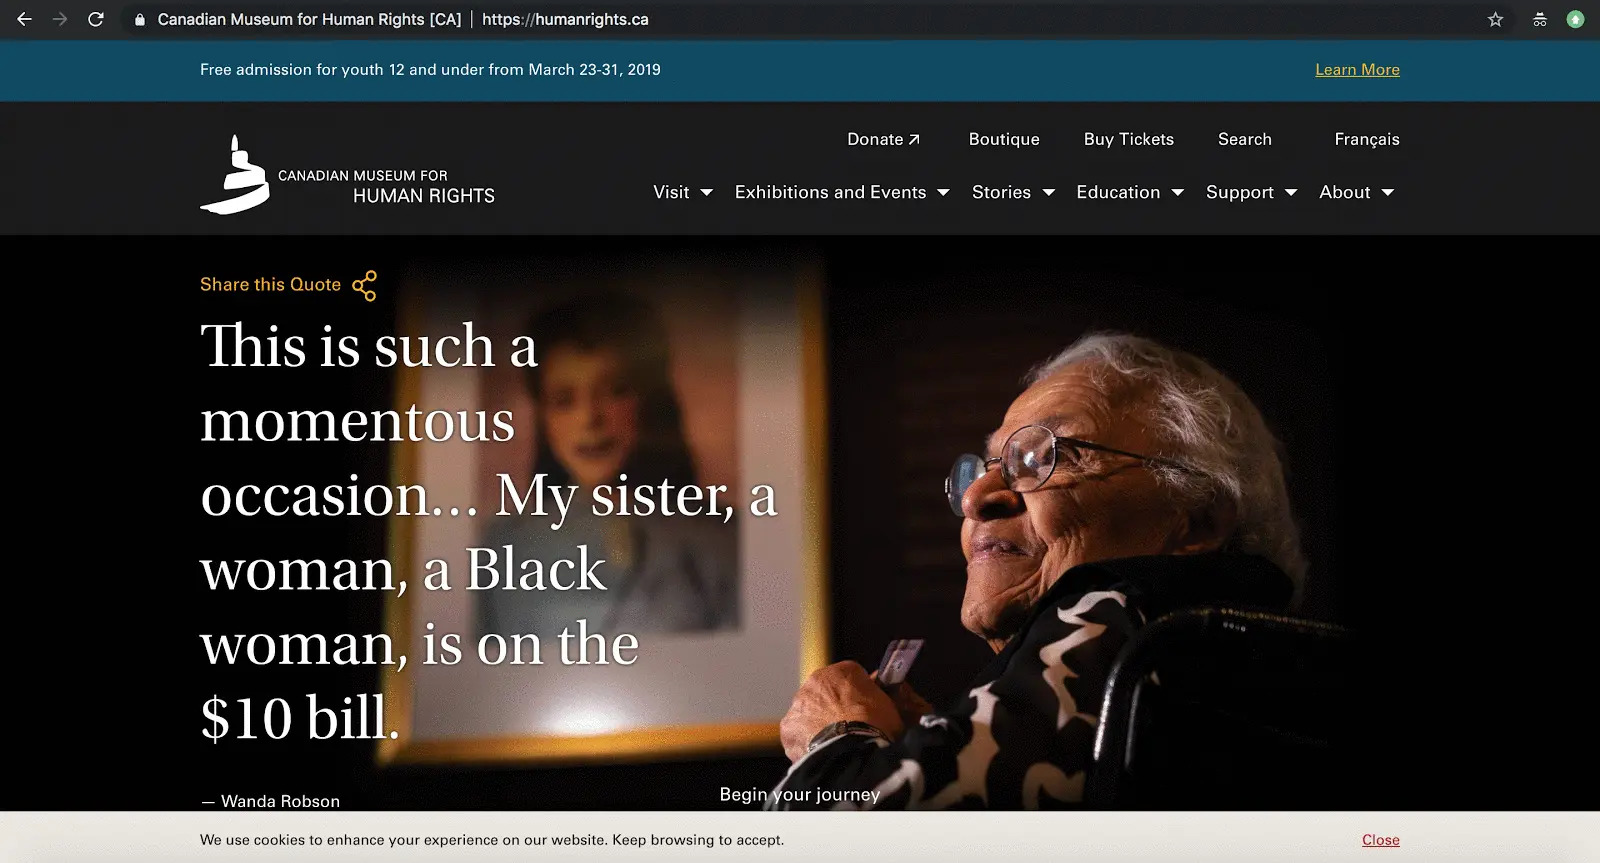 Screenshot of the Canadian Museum for Human Rights website